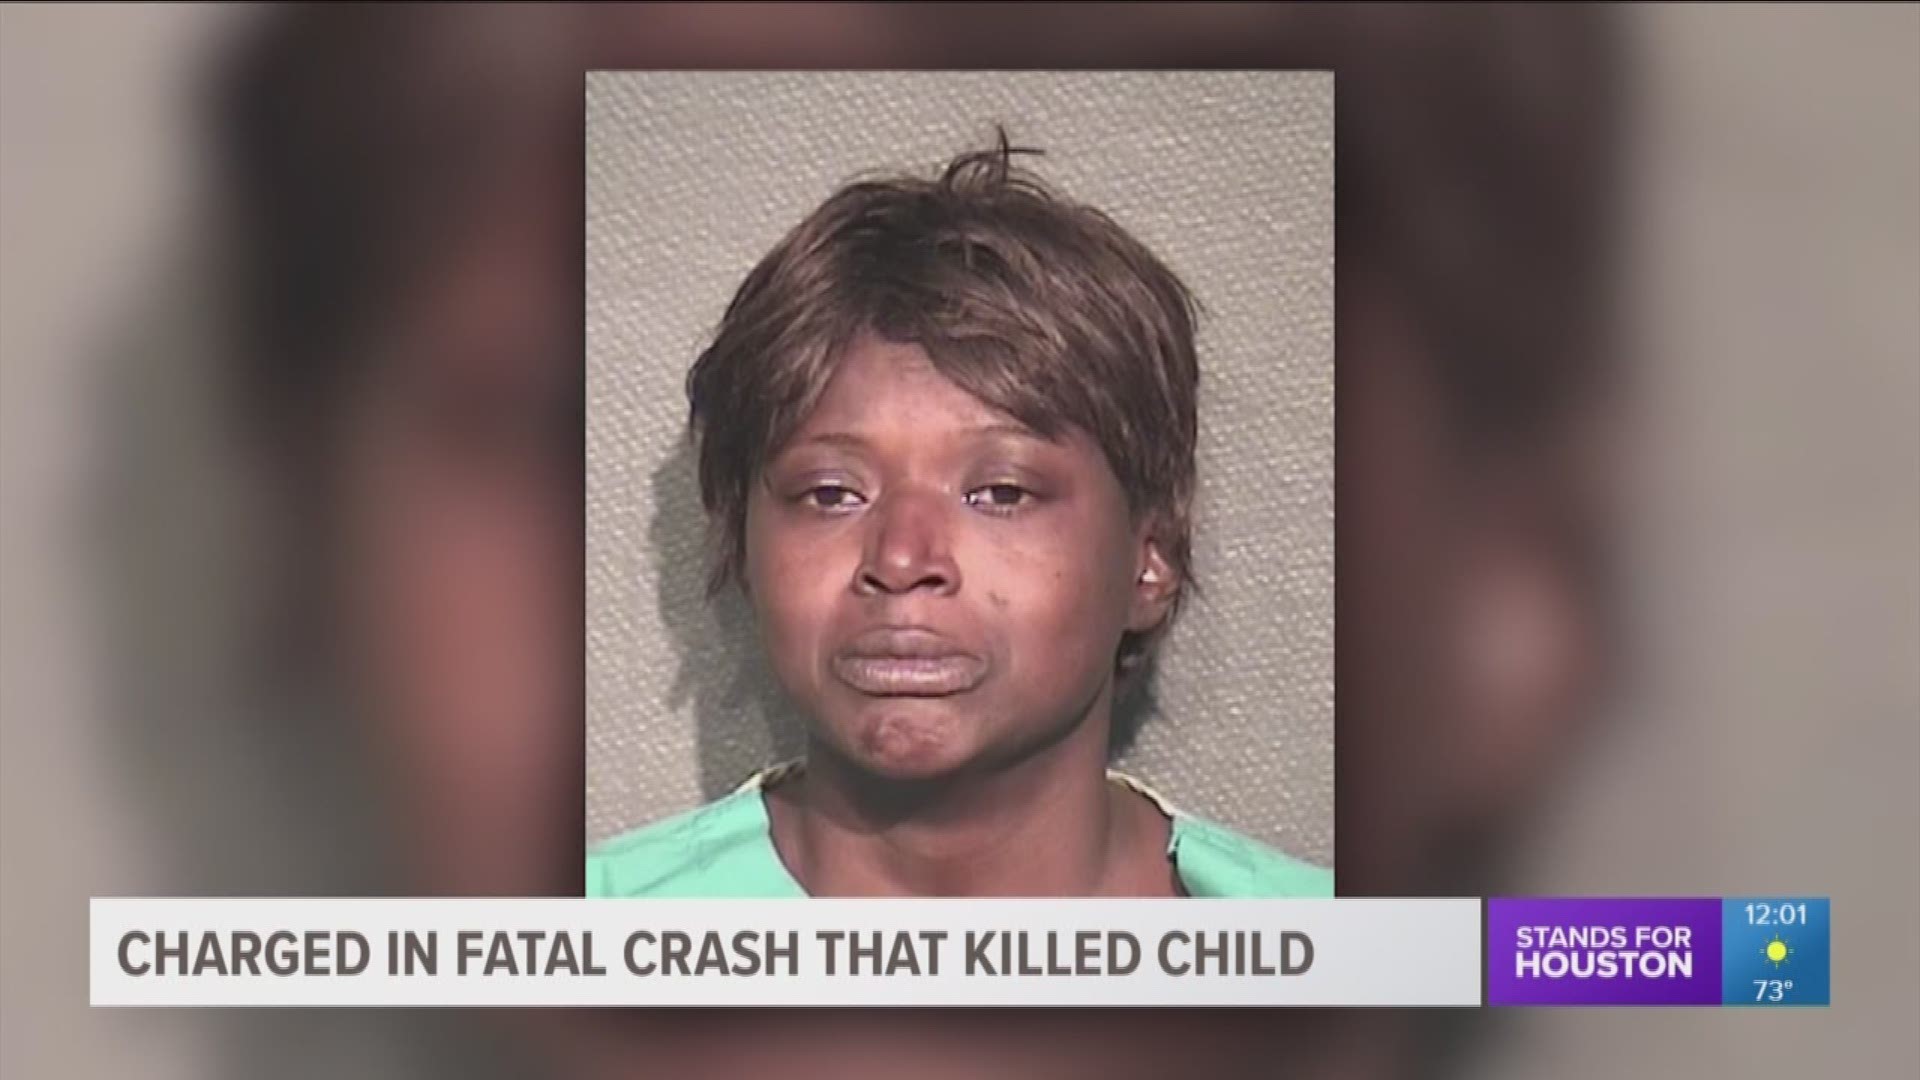 A woman has been charged in connection with a fatal car pile-up that left a 2-year-old boy dead earlier this month.